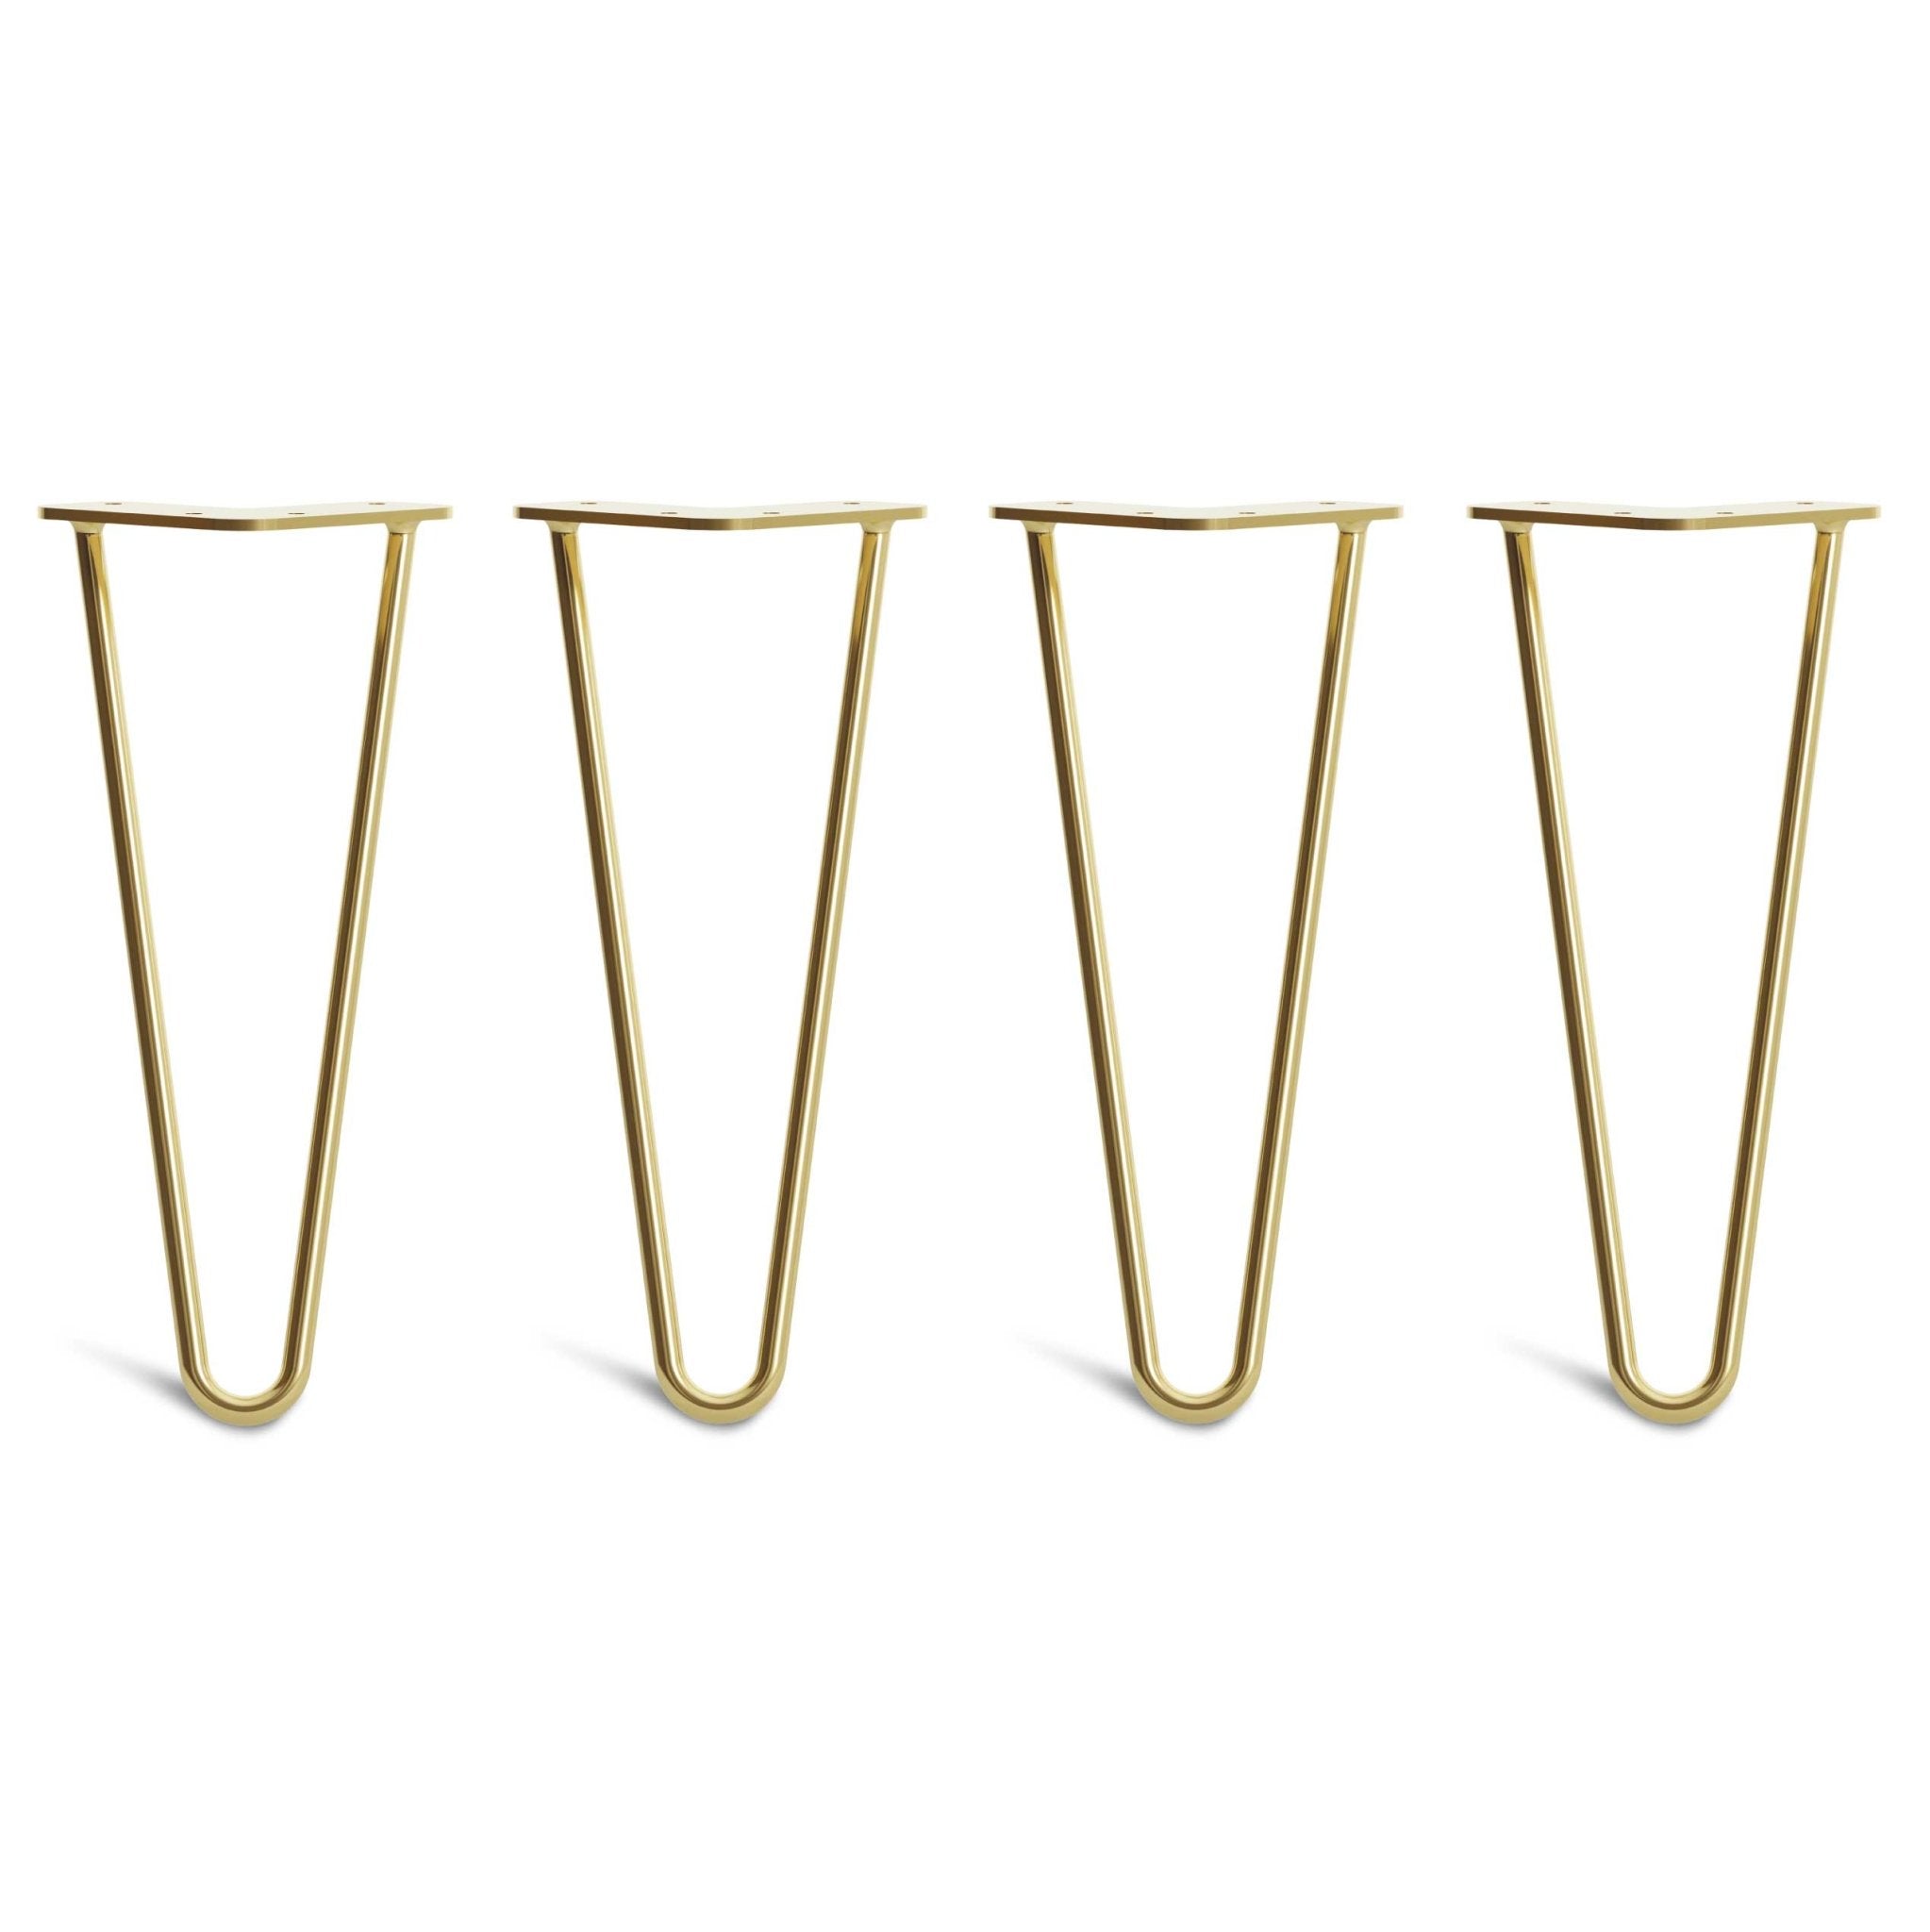 30cm Hairpin Legs - Low Coffee Table-2 Rod-Gold-The Hairpin Leg Co.